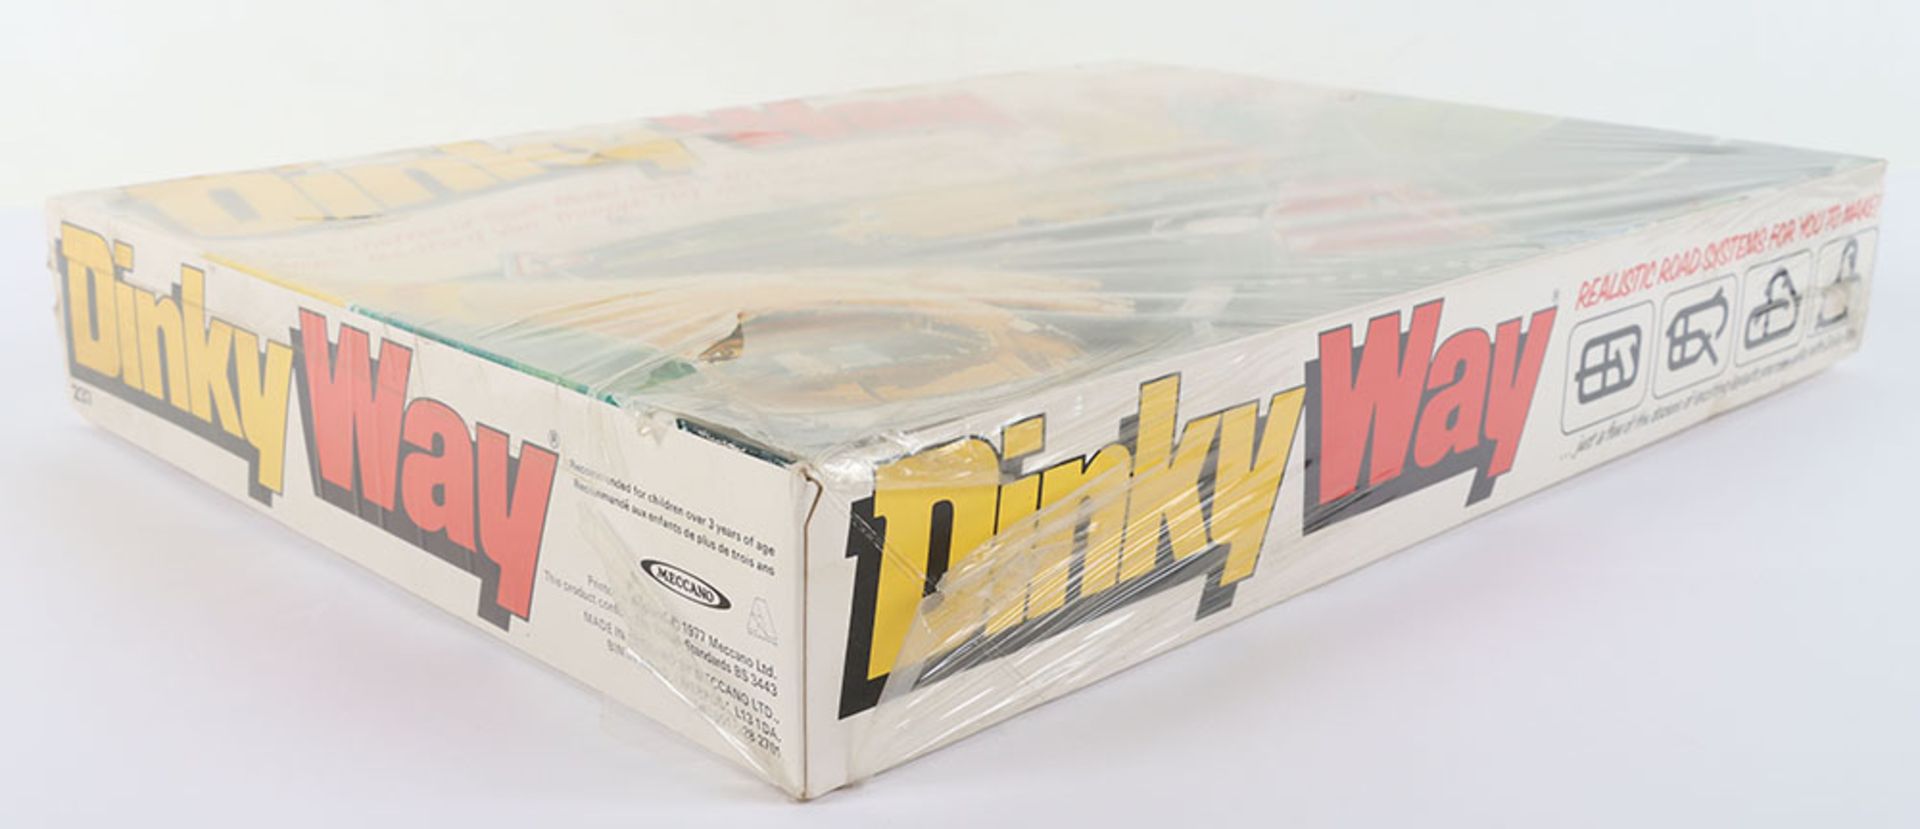 Dinky Toys Way 237 Set - Image 2 of 7